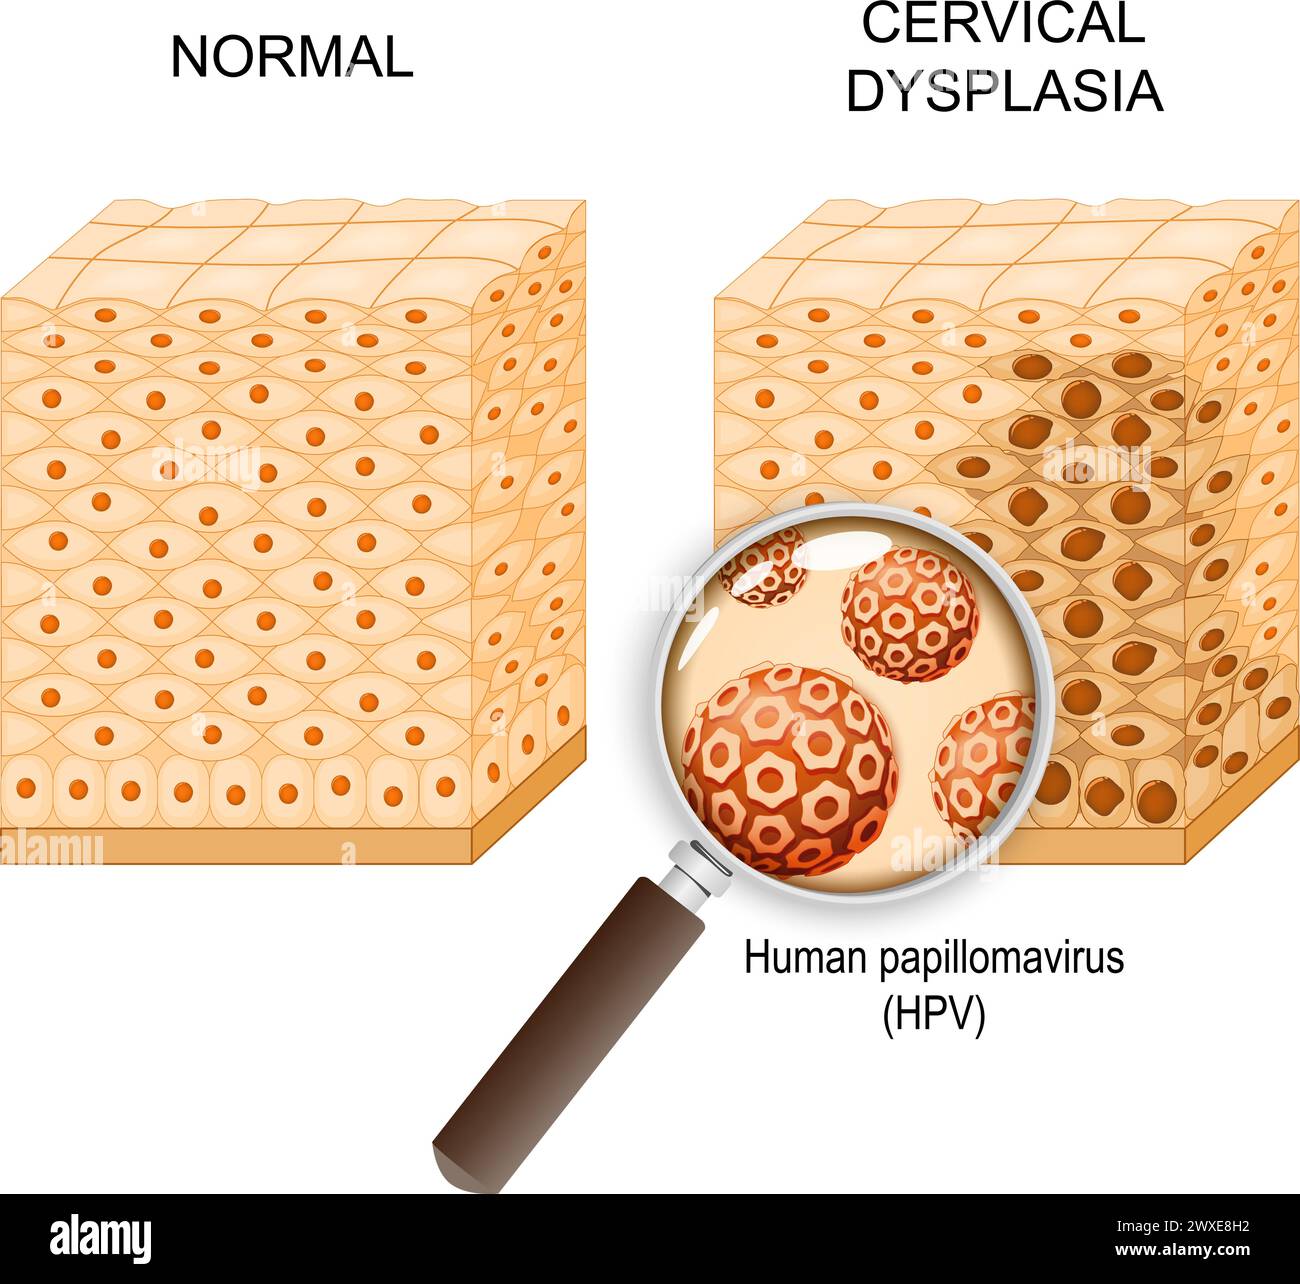 Cervical dysplasia. Cross section of a normal epithelium and Cervical Intraepithelial Neoplasia that caused of Human papillomavirus infection. Close-u Stock Vector